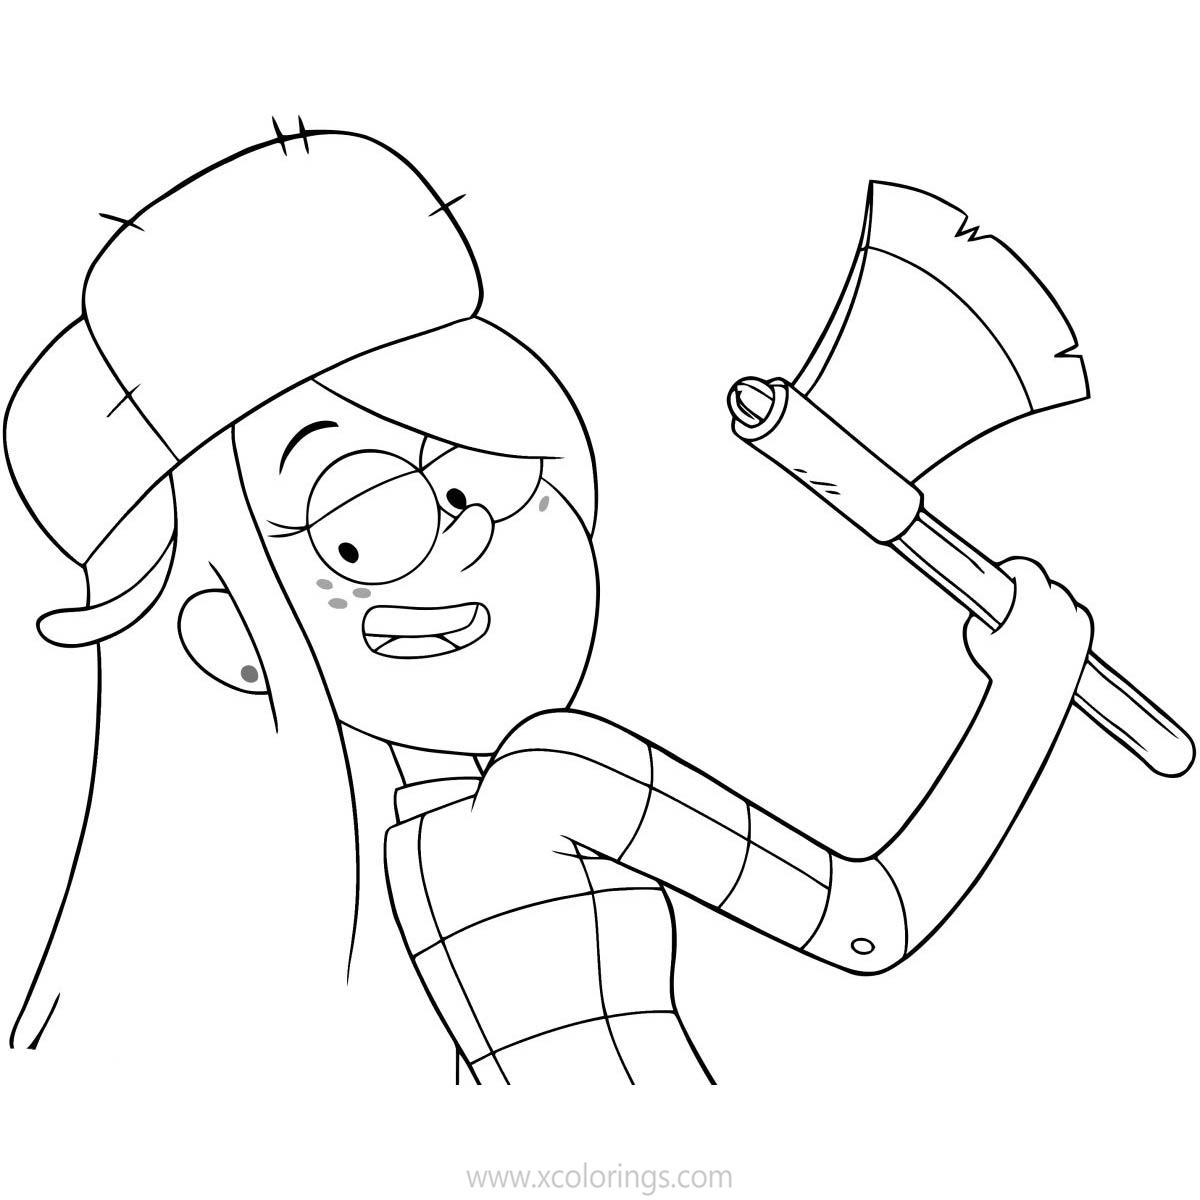 Free Gravity Falls Coloring Pages Wendy with A Axe printable